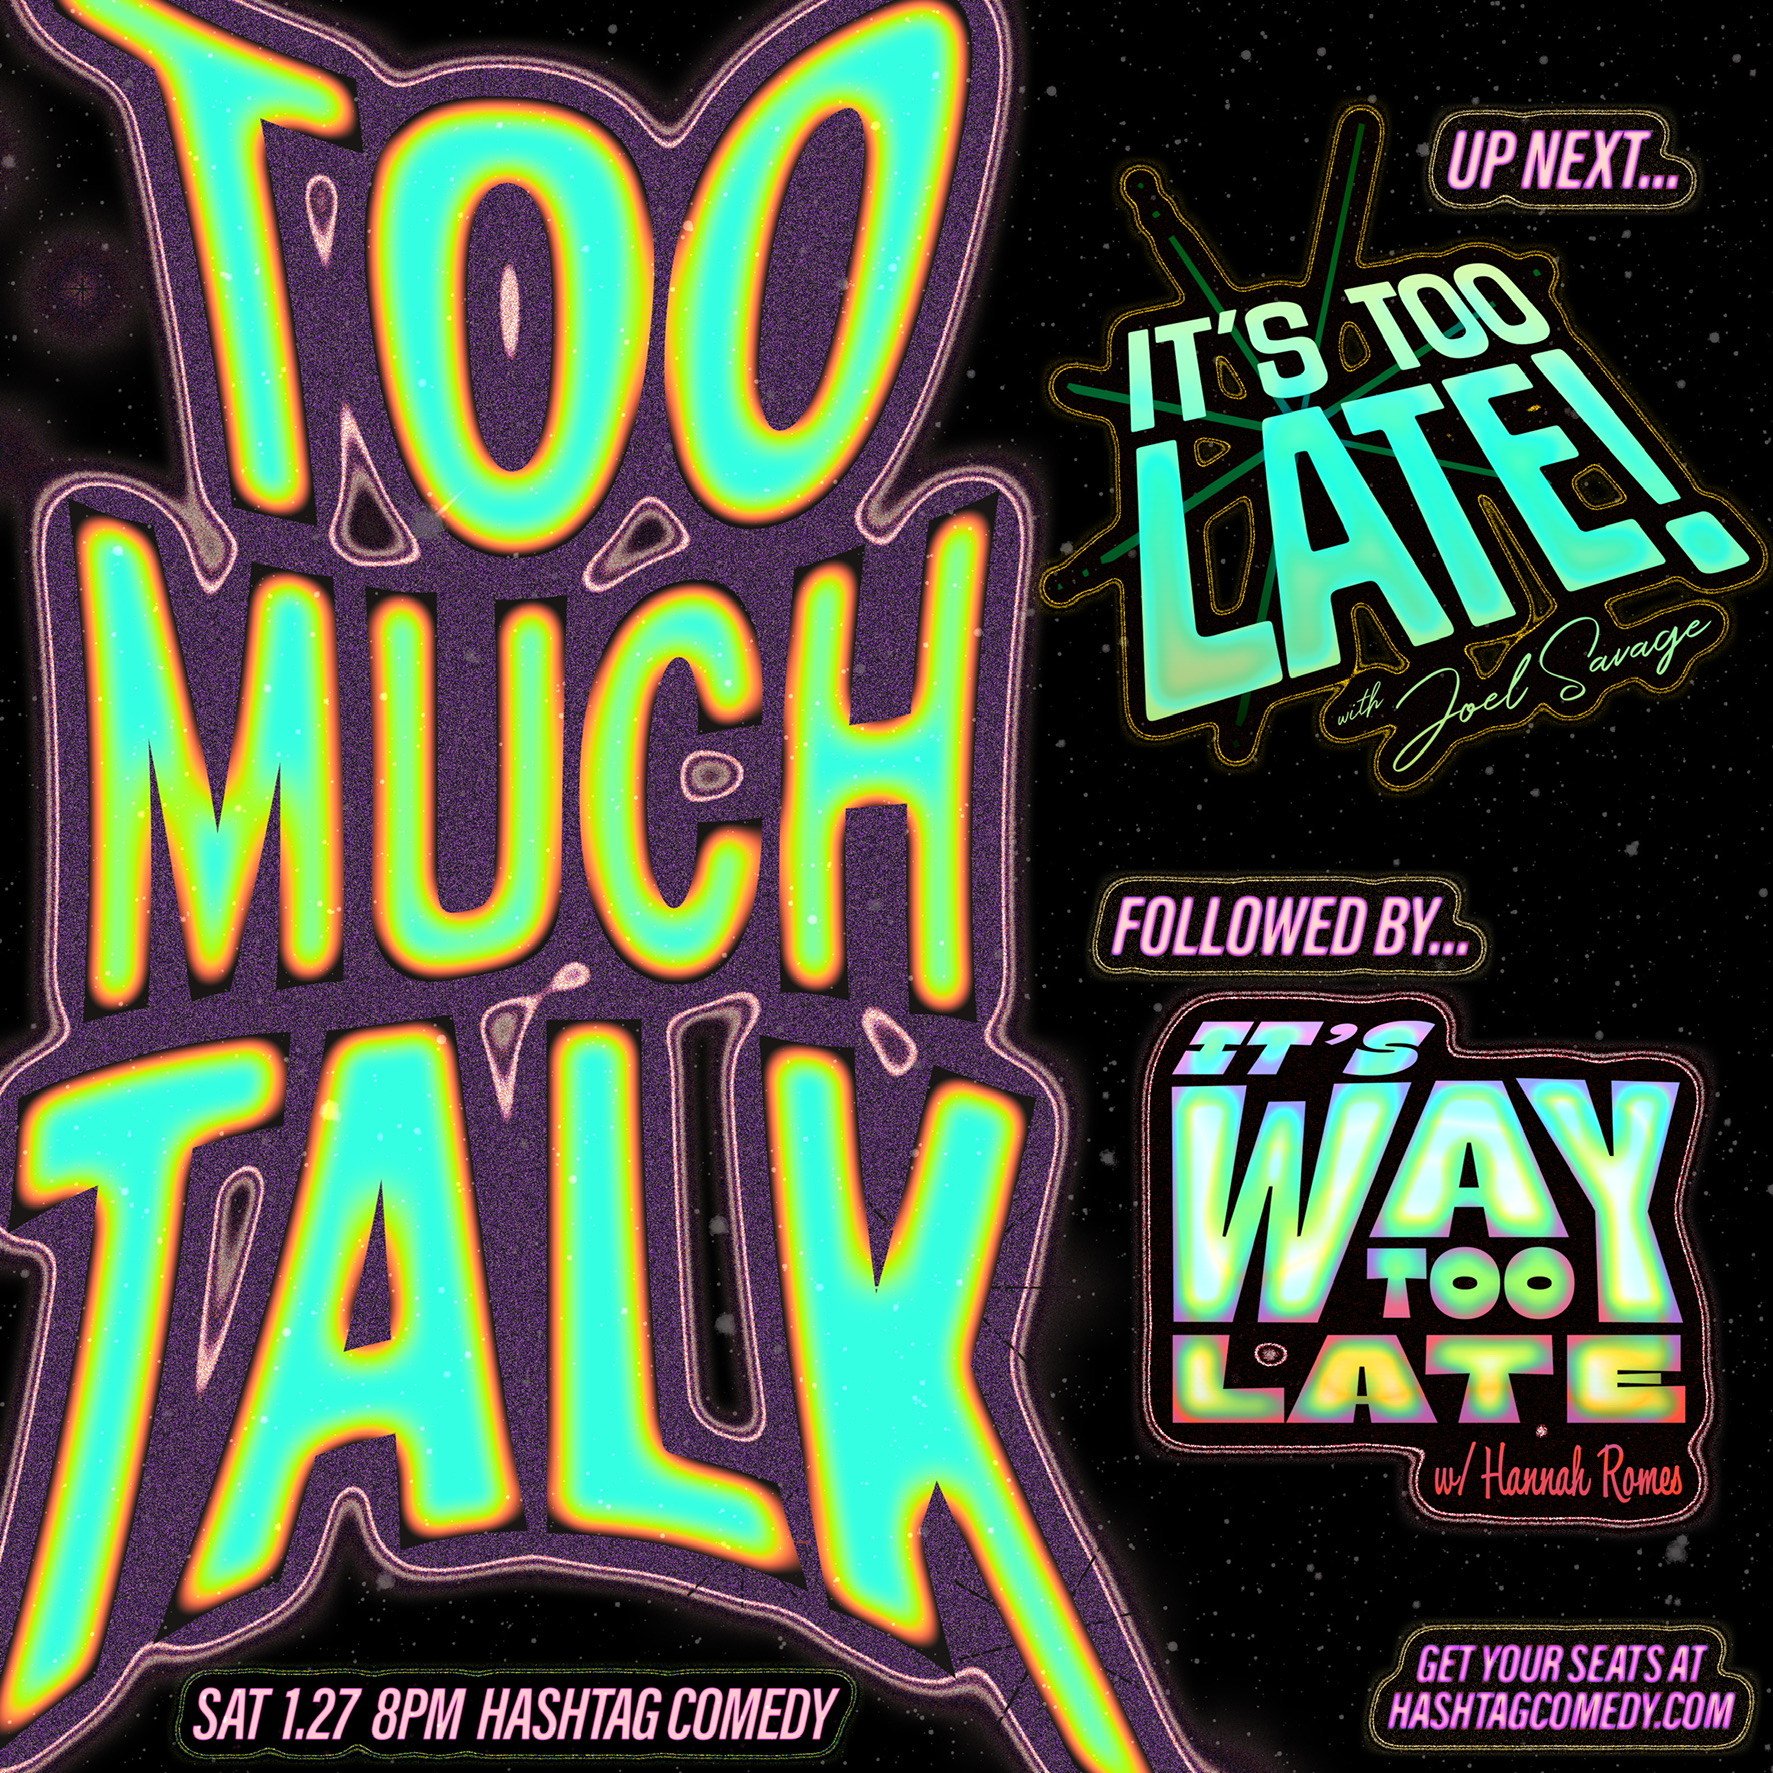 Too Much Talk! — The Hashtag Comedy Co.